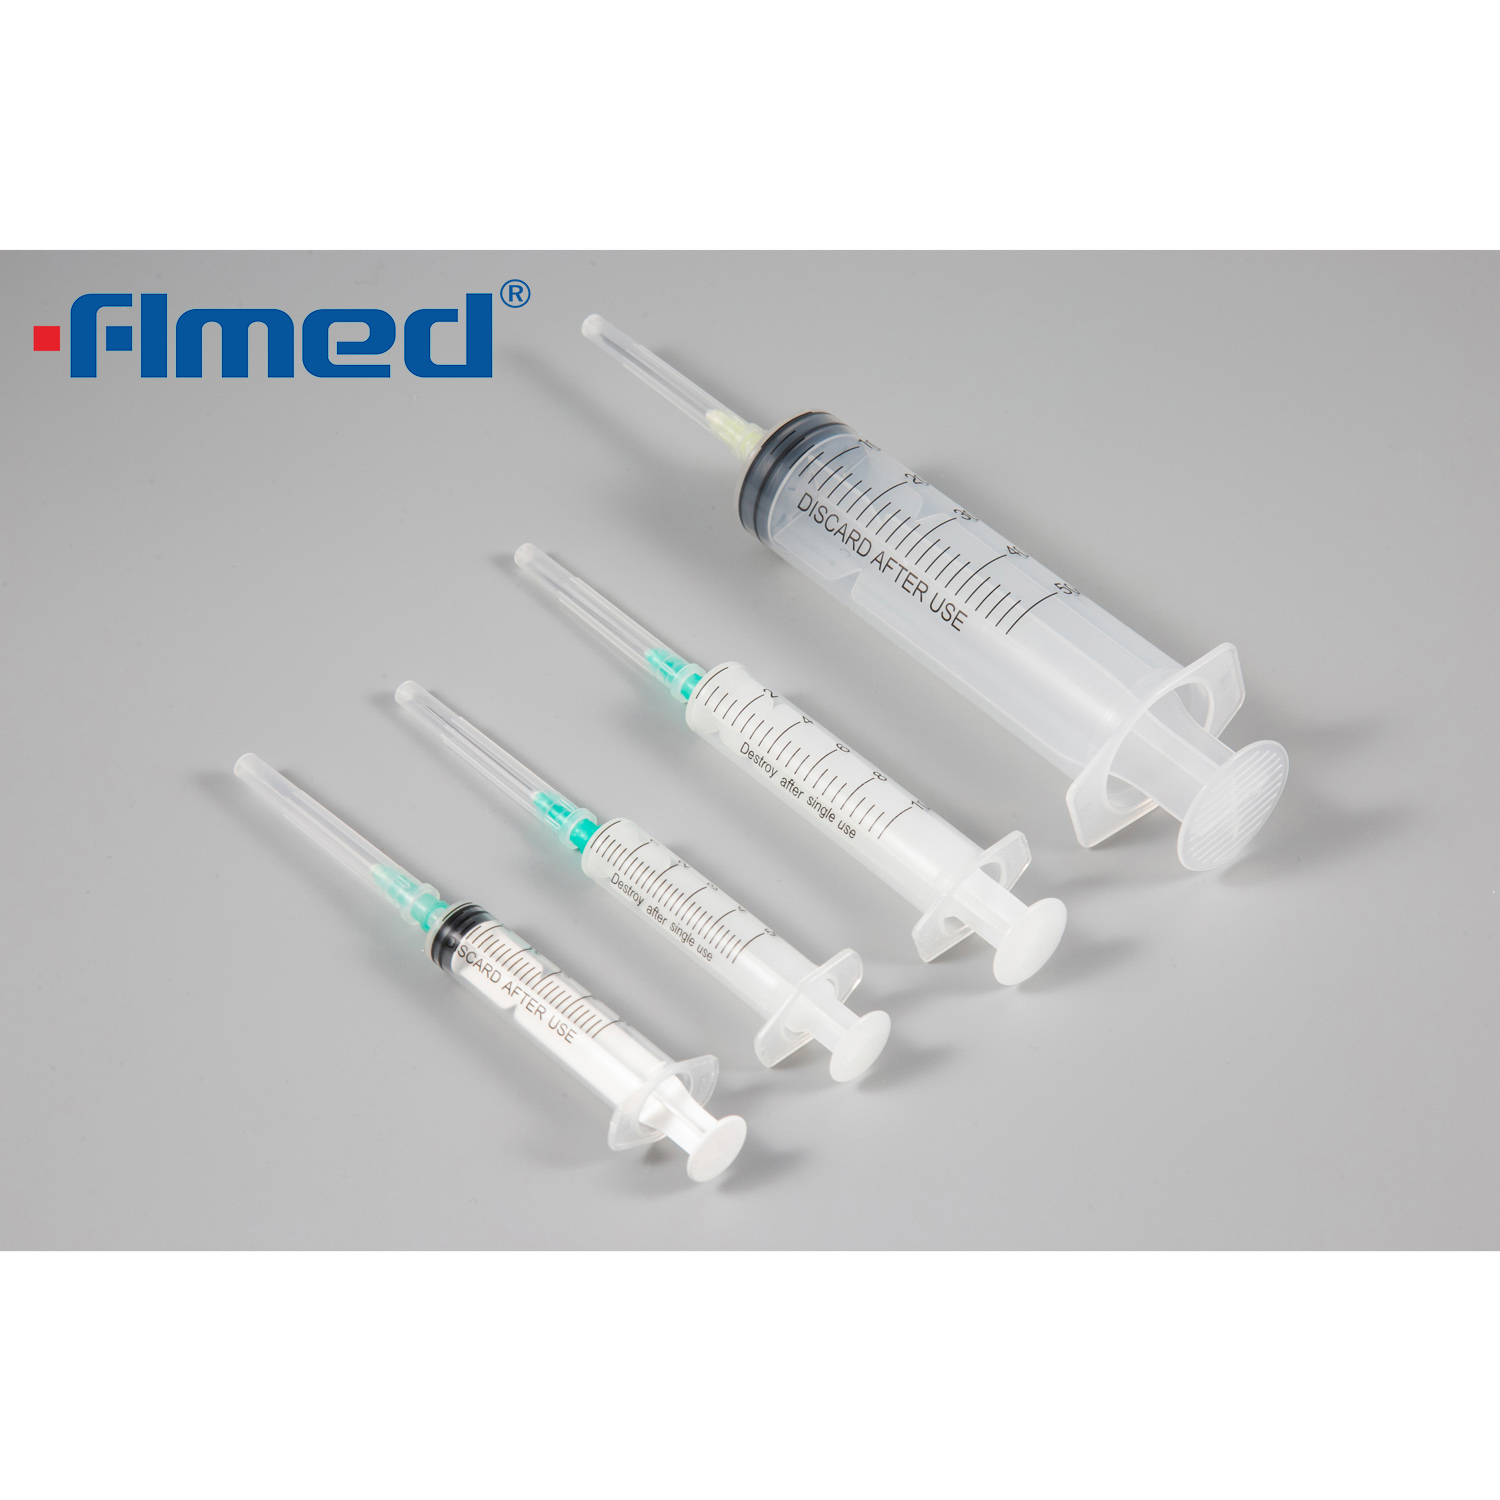 3-part Disposable Medical Syringes with Needles PE/Blister packing